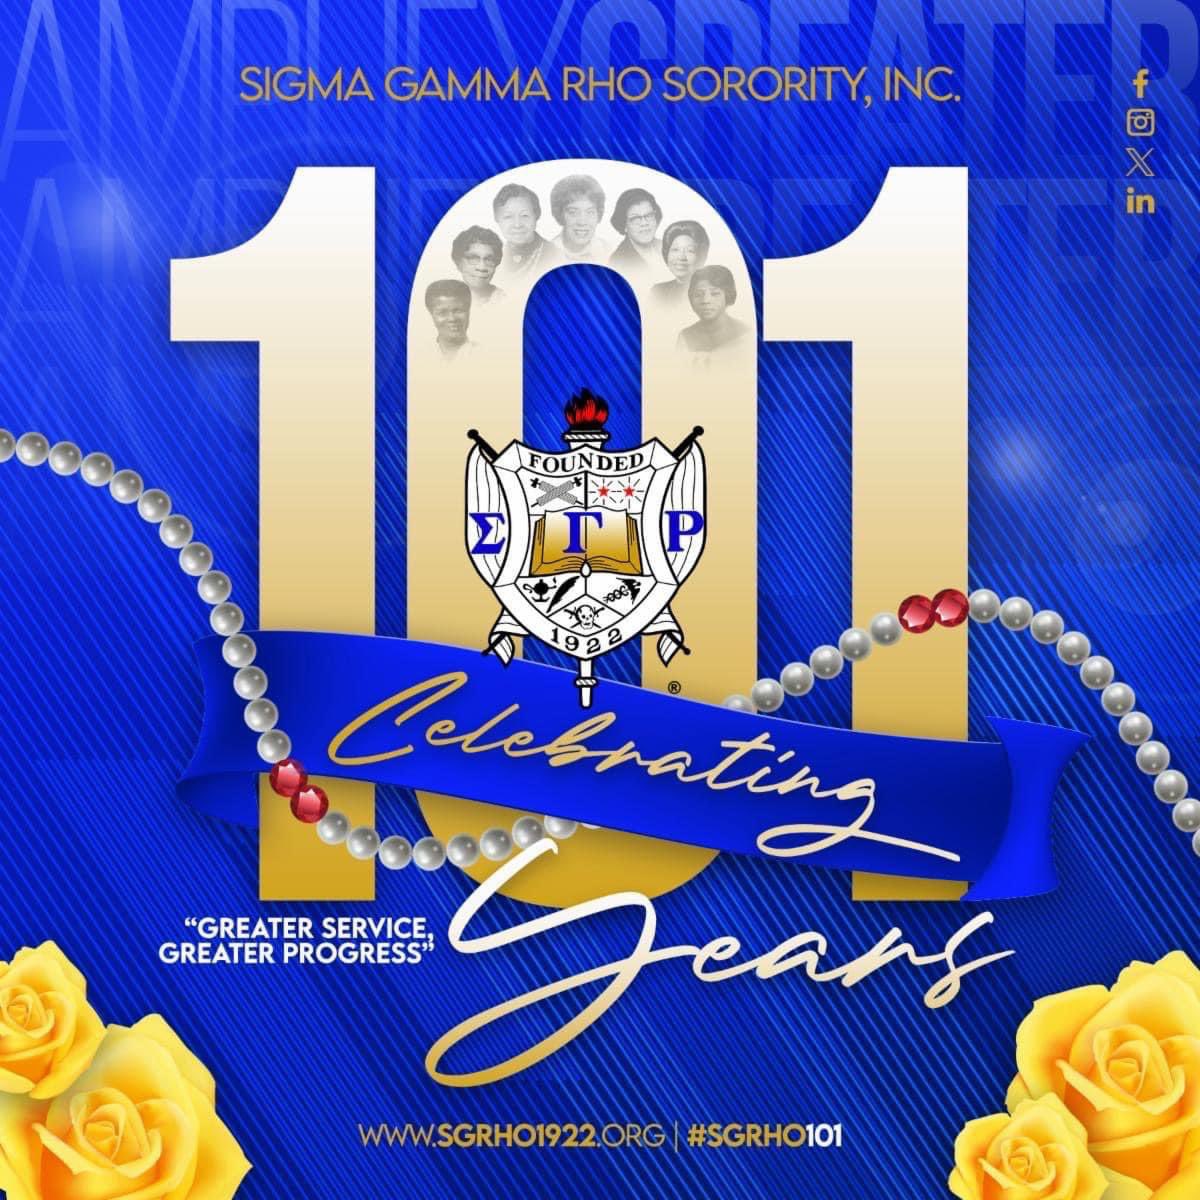 Oh to be a pretty poodle 💙🐩💛  Happy Founders’ Day to the greatest sorority ever! 

#SigmaGammaRho #GreaterWomenGreaterWorld #SGRho101 #AmplifyGreater #FoundersDay